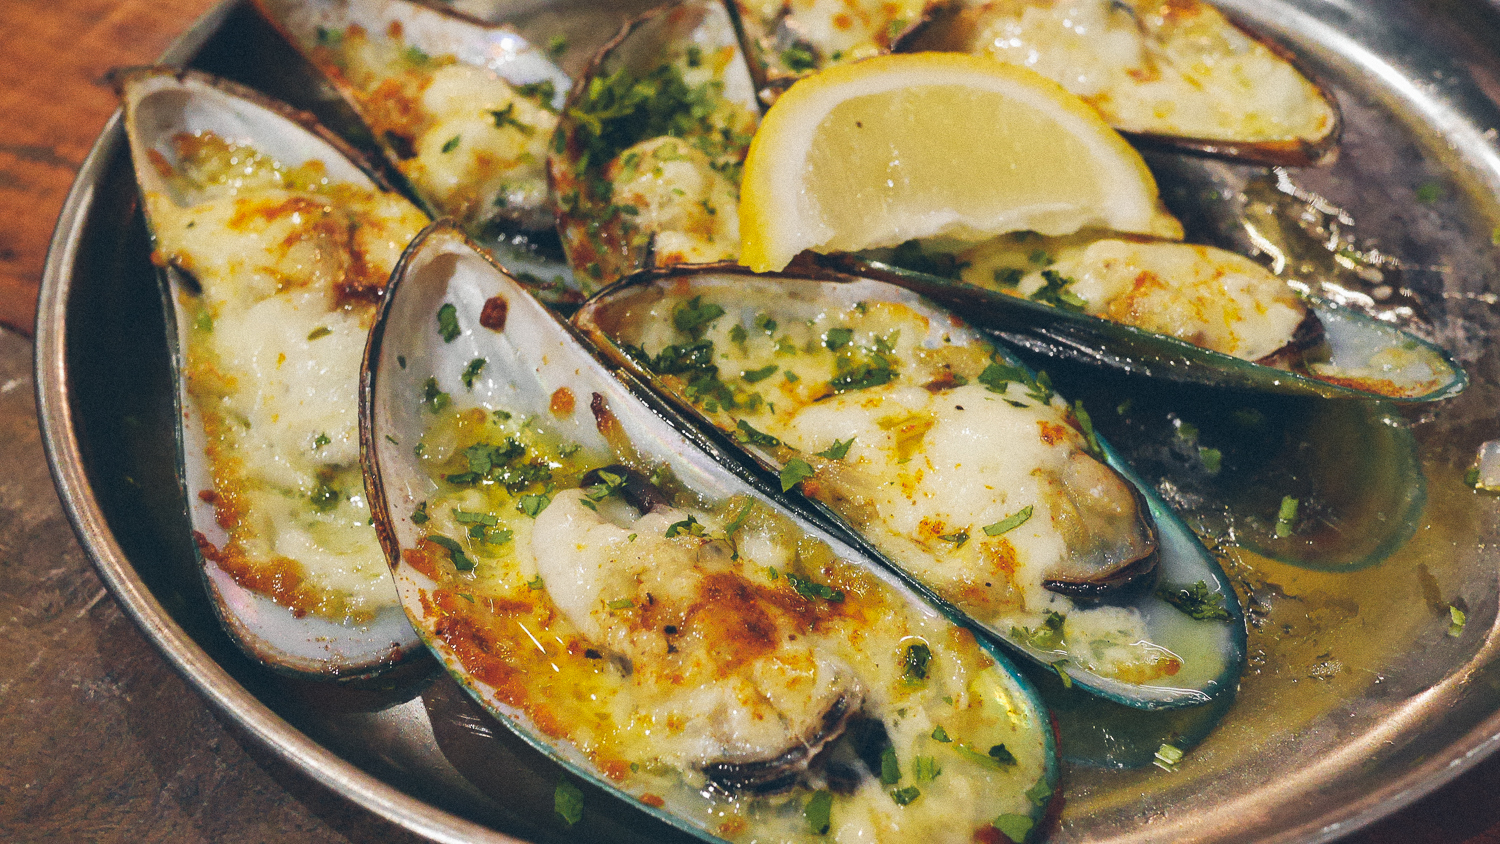 Gringo baked mussels